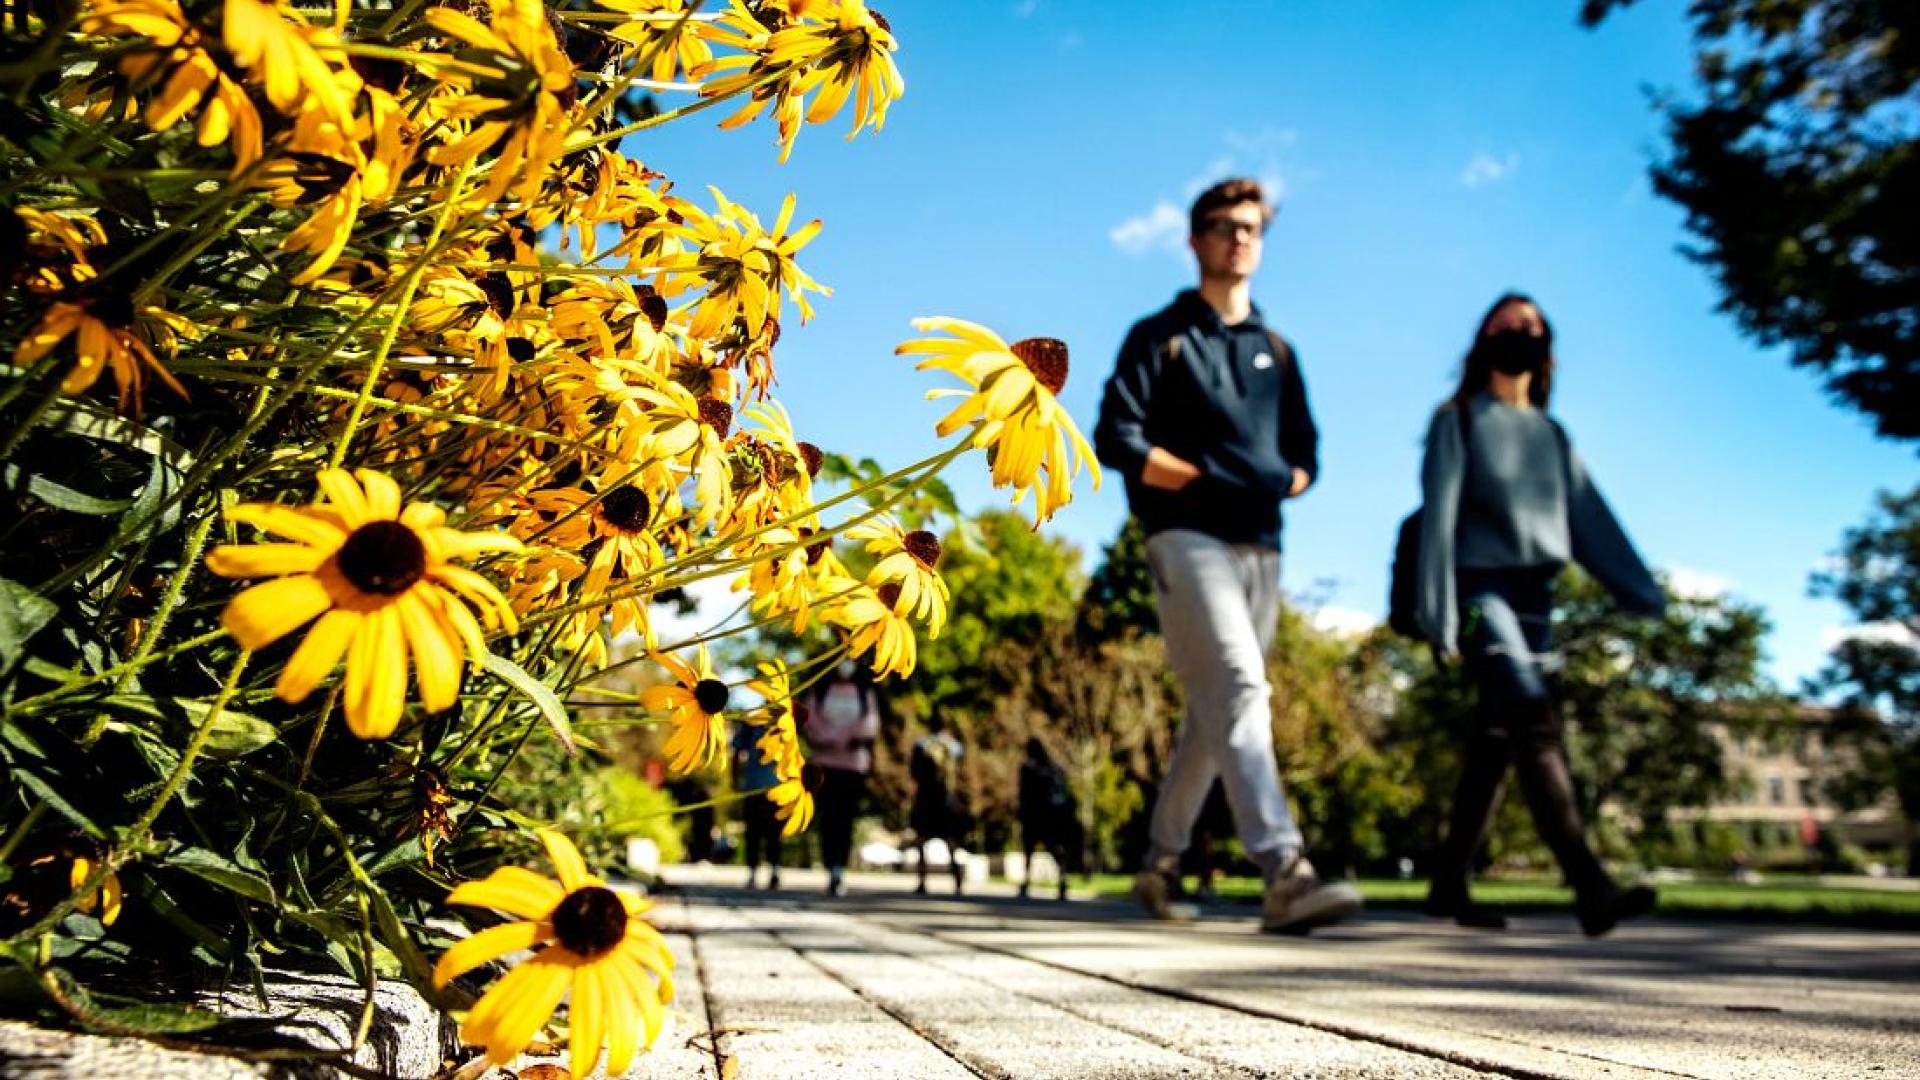 Bright yellow flowers in front of students walking on a sidewalk.